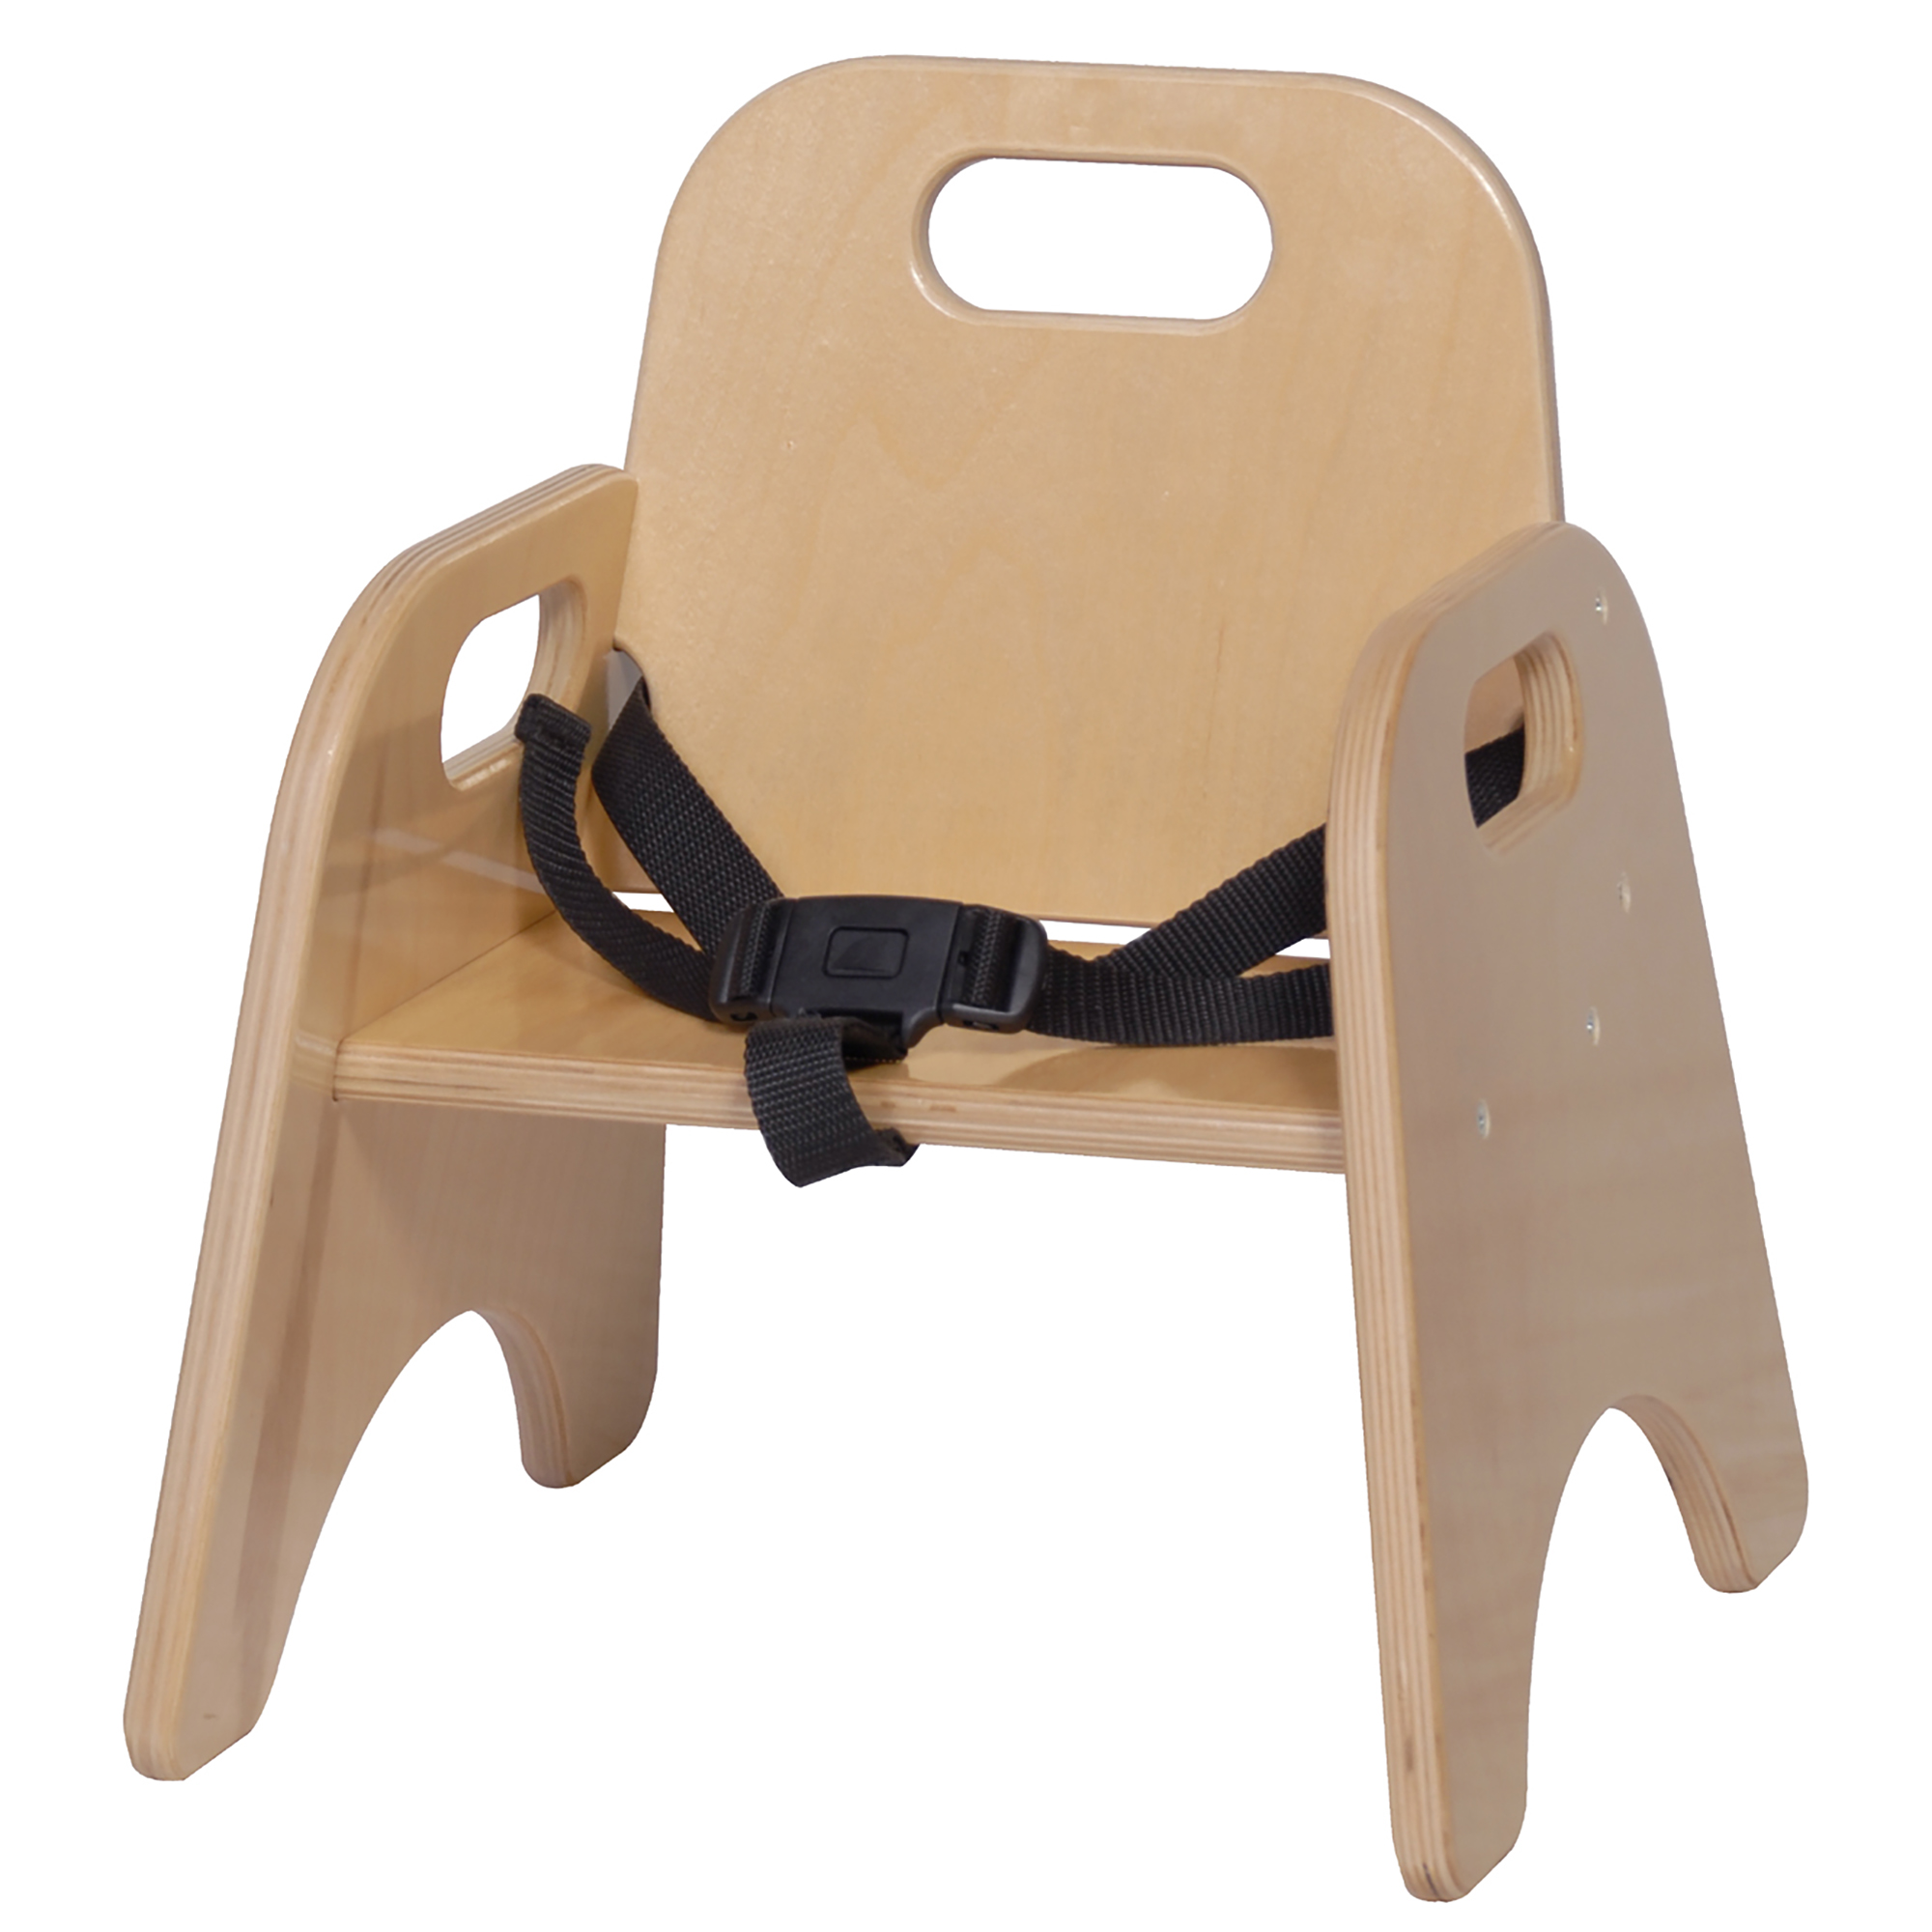 7 Toddler Chair With Strap Children, Toddler Wooden Chair With Arms